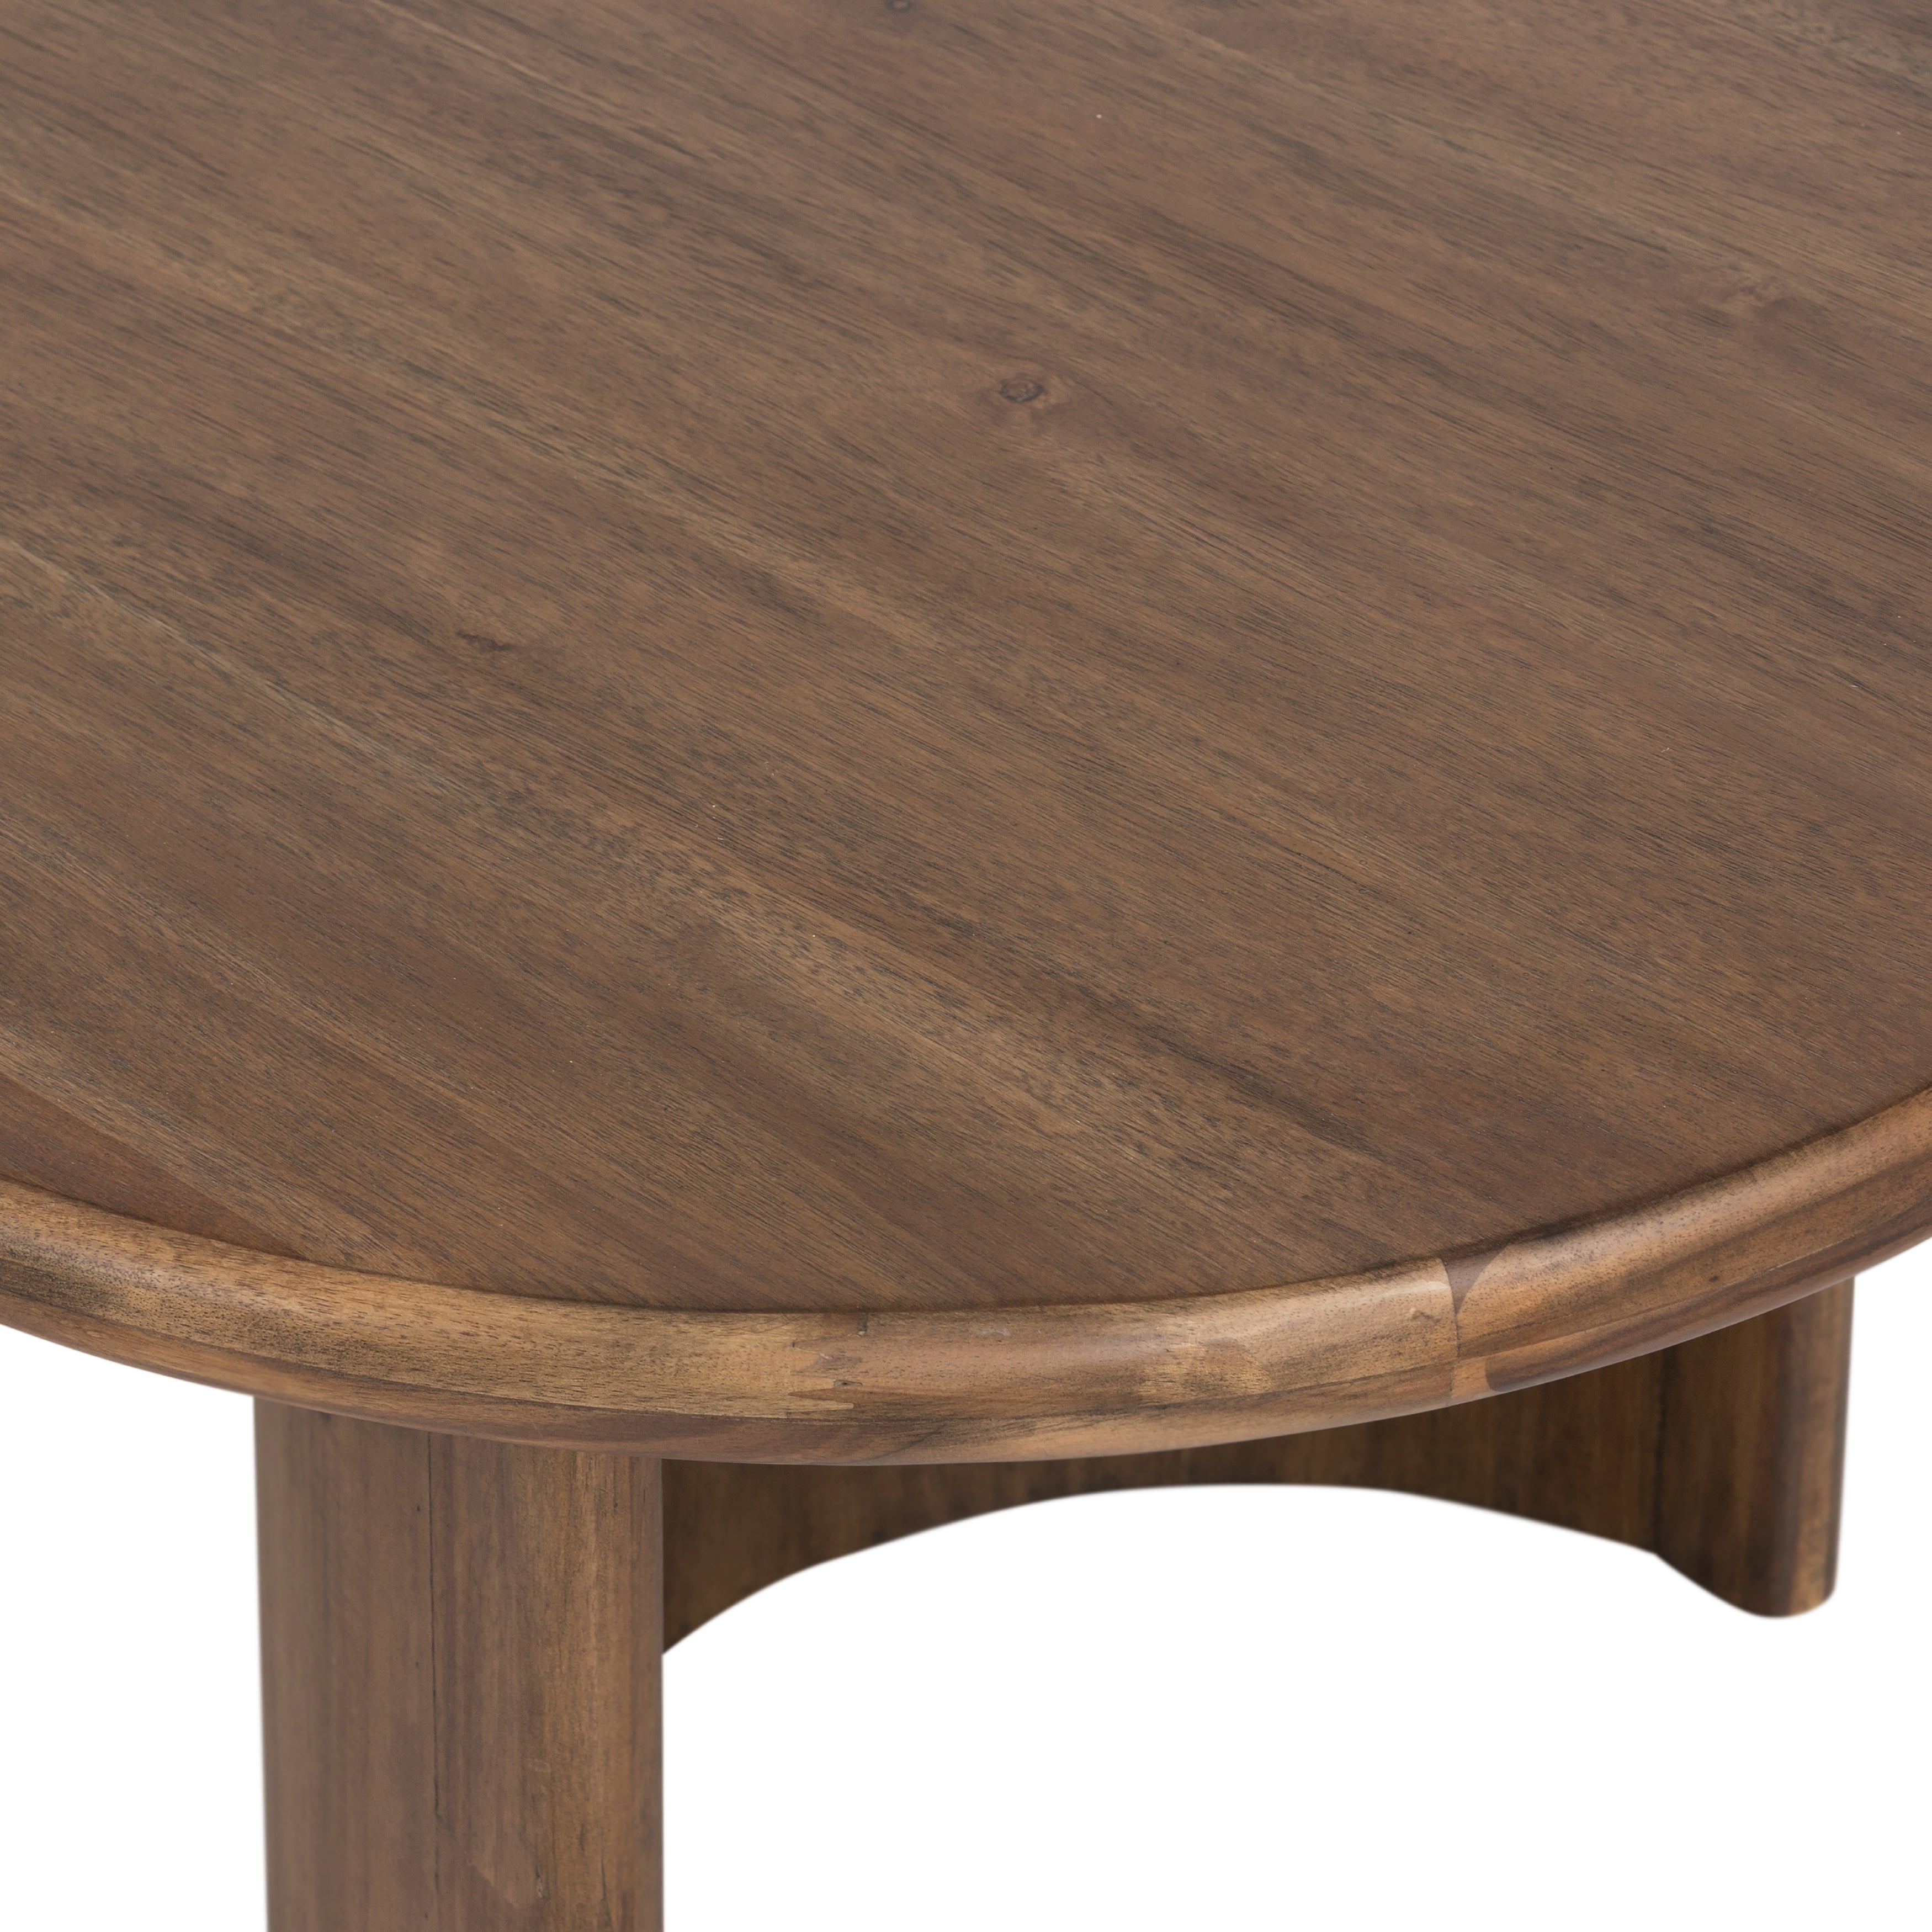 A study in shape. Solid brown acacia forms crescent-shaped legs and sprawling oval tabletop, bringing organic presence to the living room. Amethyst Home provides interior design, new construction, custom furniture and area rugs in the Des Moines metro area